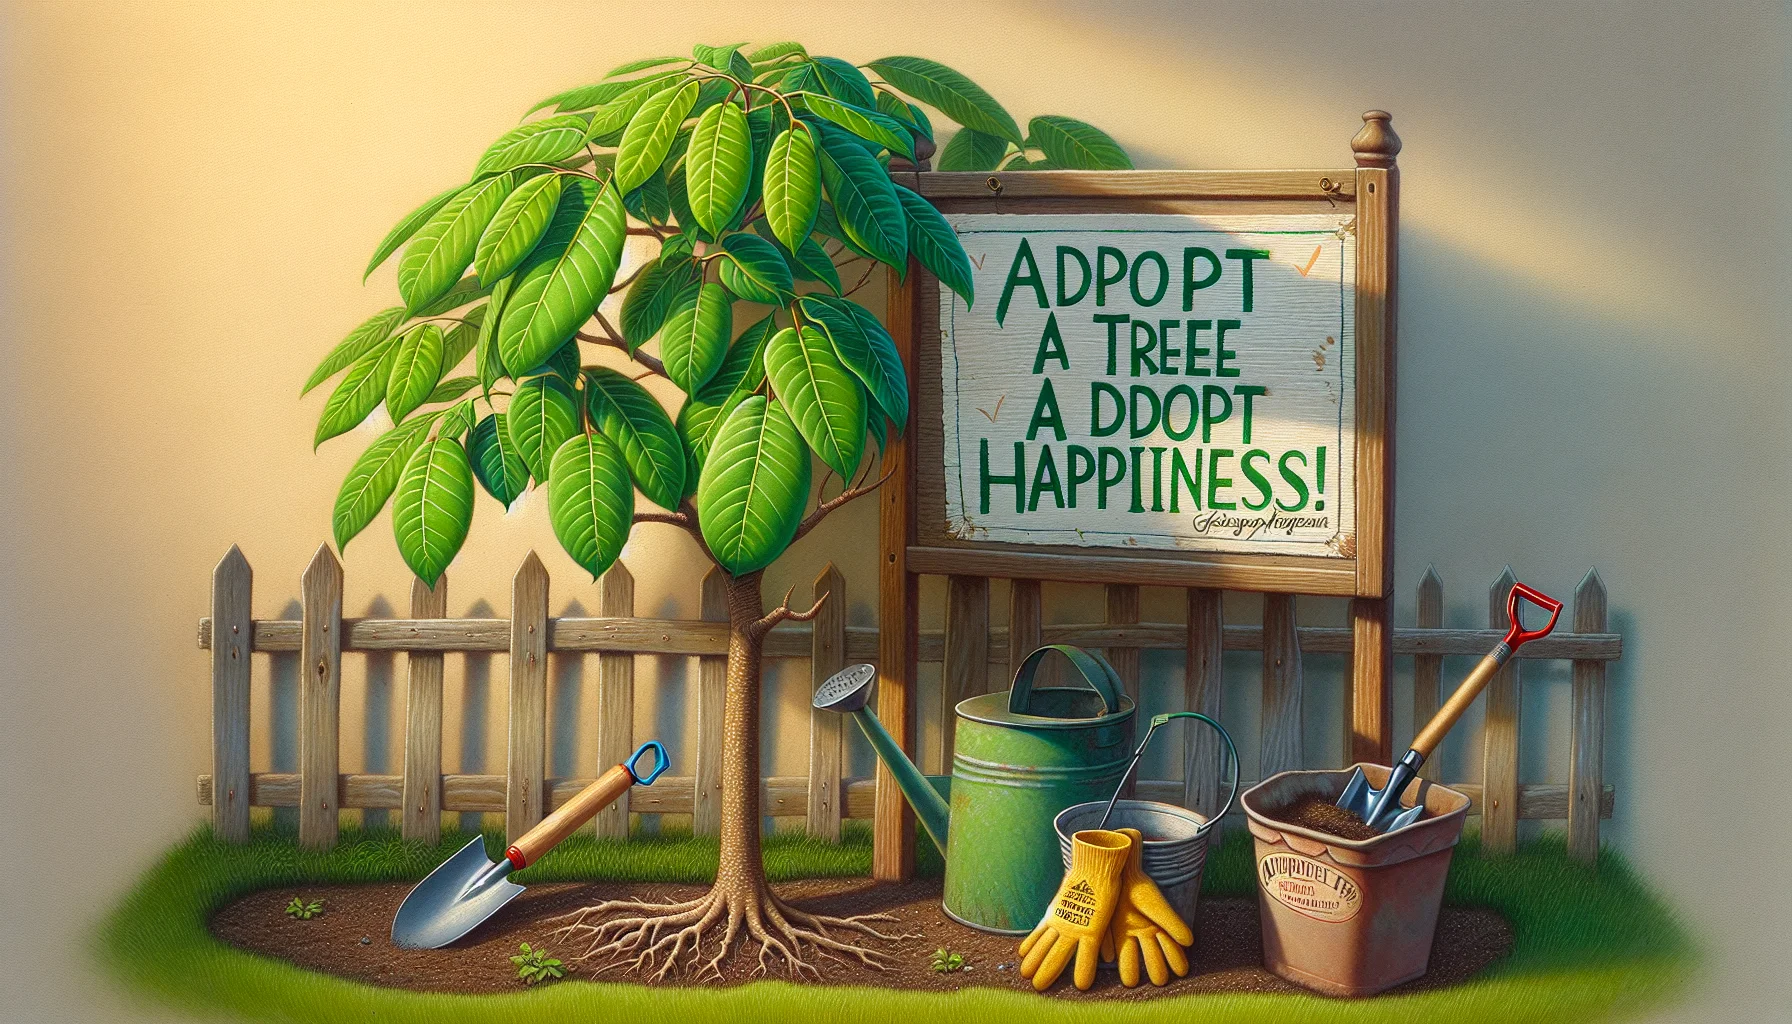 Create a highly detailed, realistic image of a pawpaw tree with bright green, glossy leaves. Beside the tree is a sign reading, 'Adopt a Tree, Adopt Happiness!' that appears to have been playfully scribbled by an enthusiastic gardener. A typical gardening gear - gloves, shovel, and a watering can – is seen next to the tree, left in a manner indicating an ongoing gardening session. The scene is set in a small, sunlit garden surrounded by a picket fence, evoking a sense of warmth and inviting the viewer to indulge in the joy of gardening.